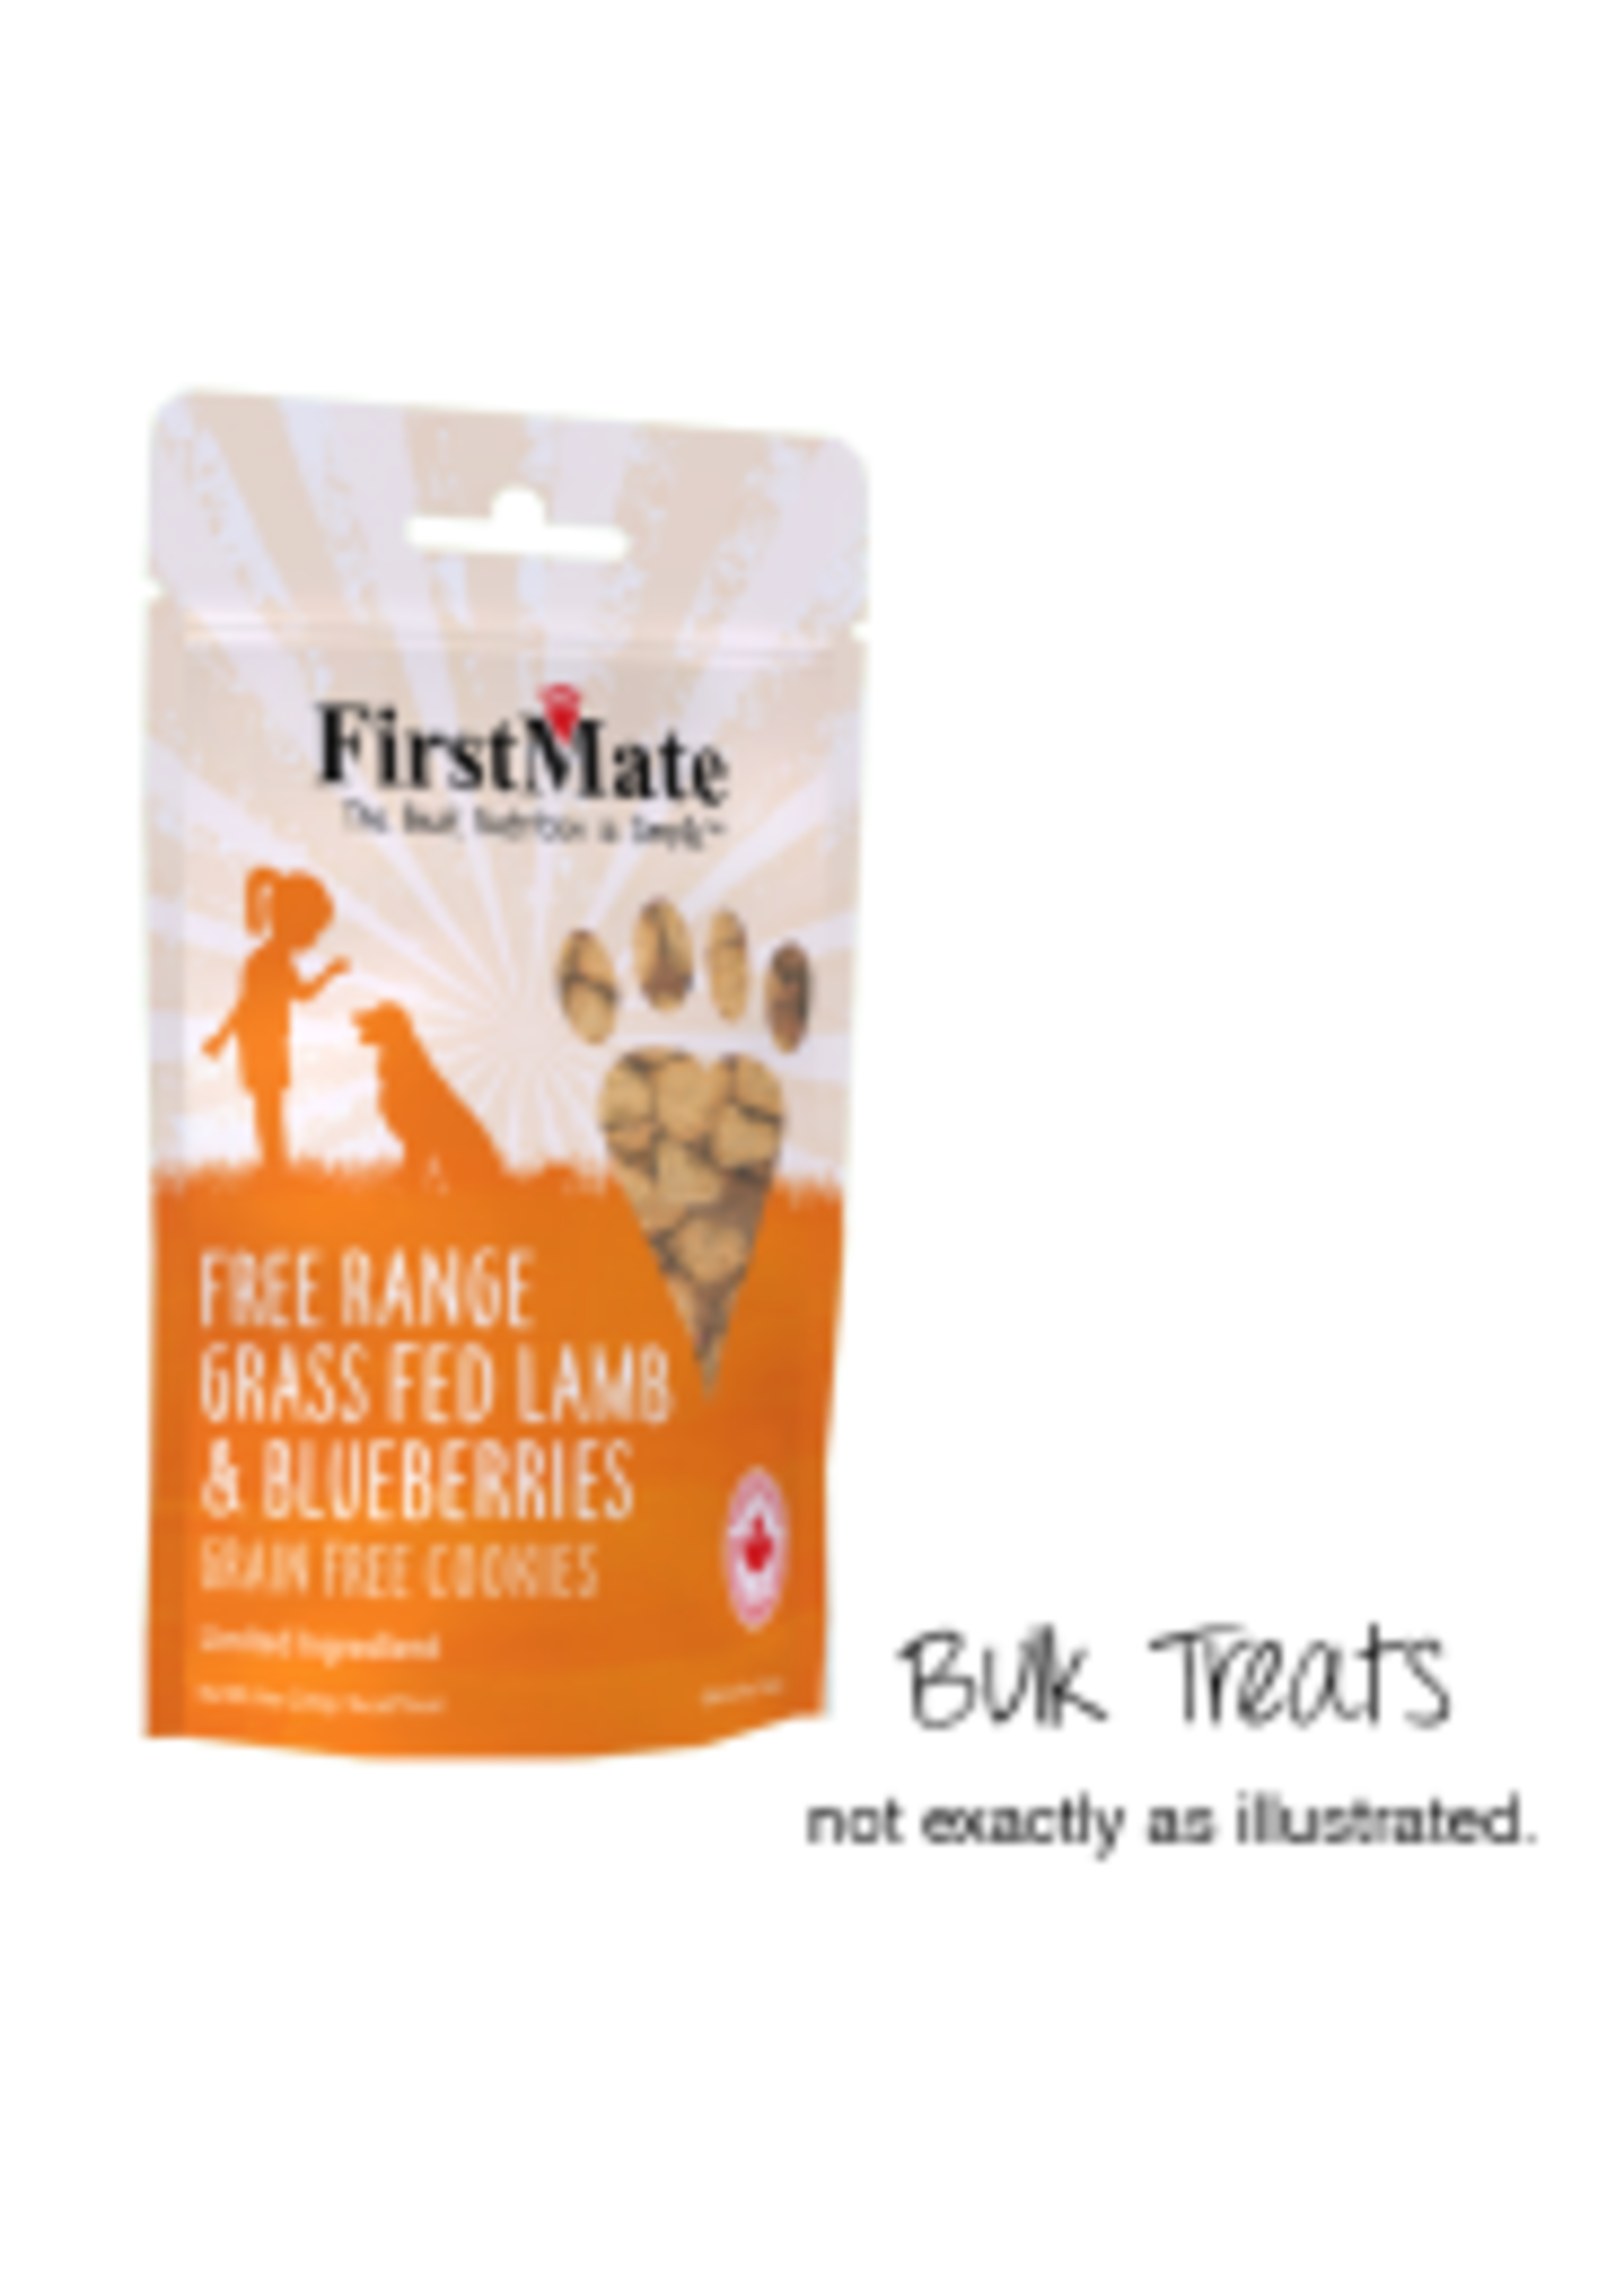 FirstMate Firstmate - Grain Free Lamb & Blueberry (per ounce)